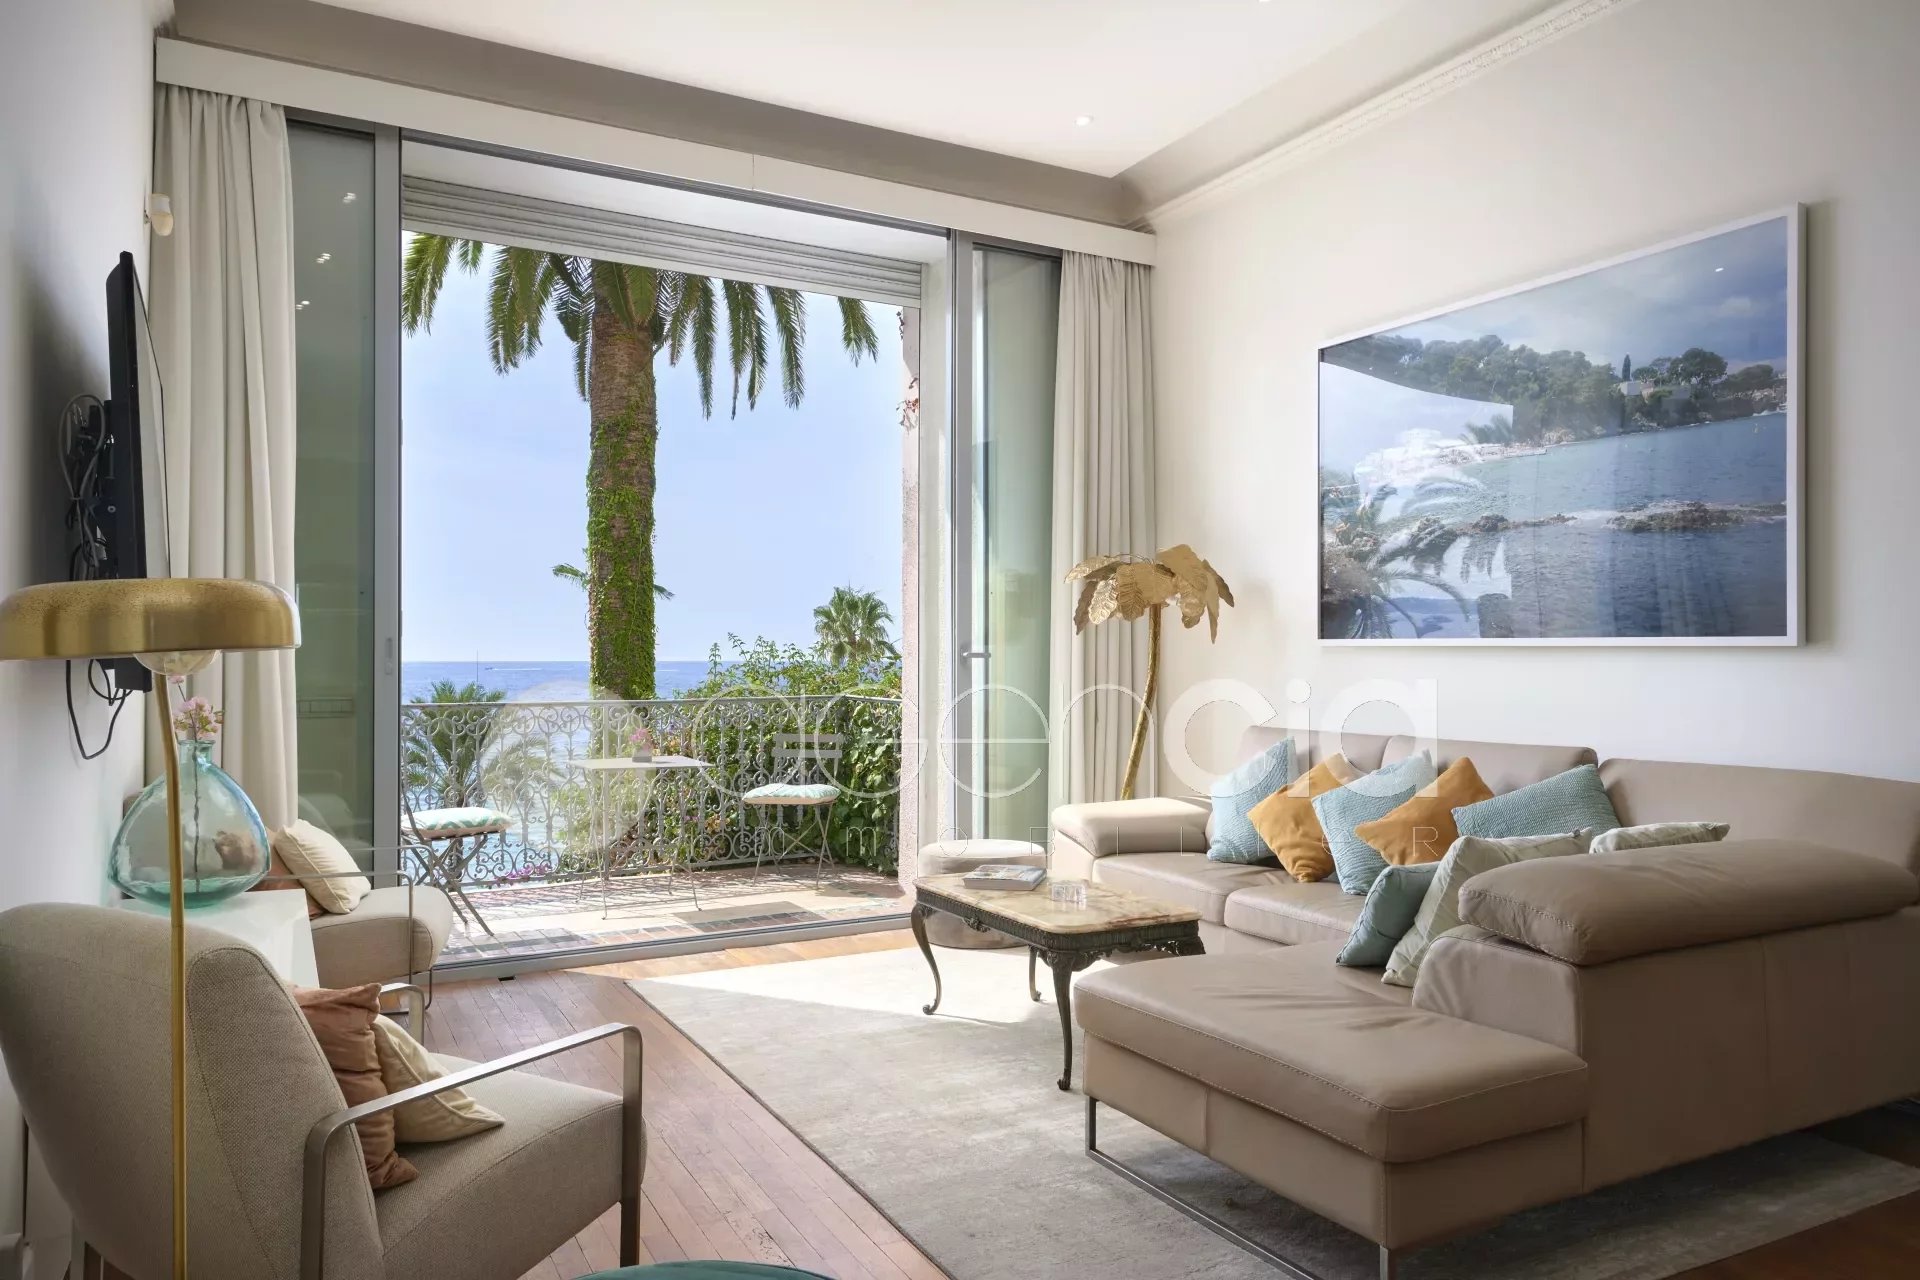 Exceptional Apartment in the Old Port of Cannes - Splendid Sea View, Beaches and Downtown at Your Feet